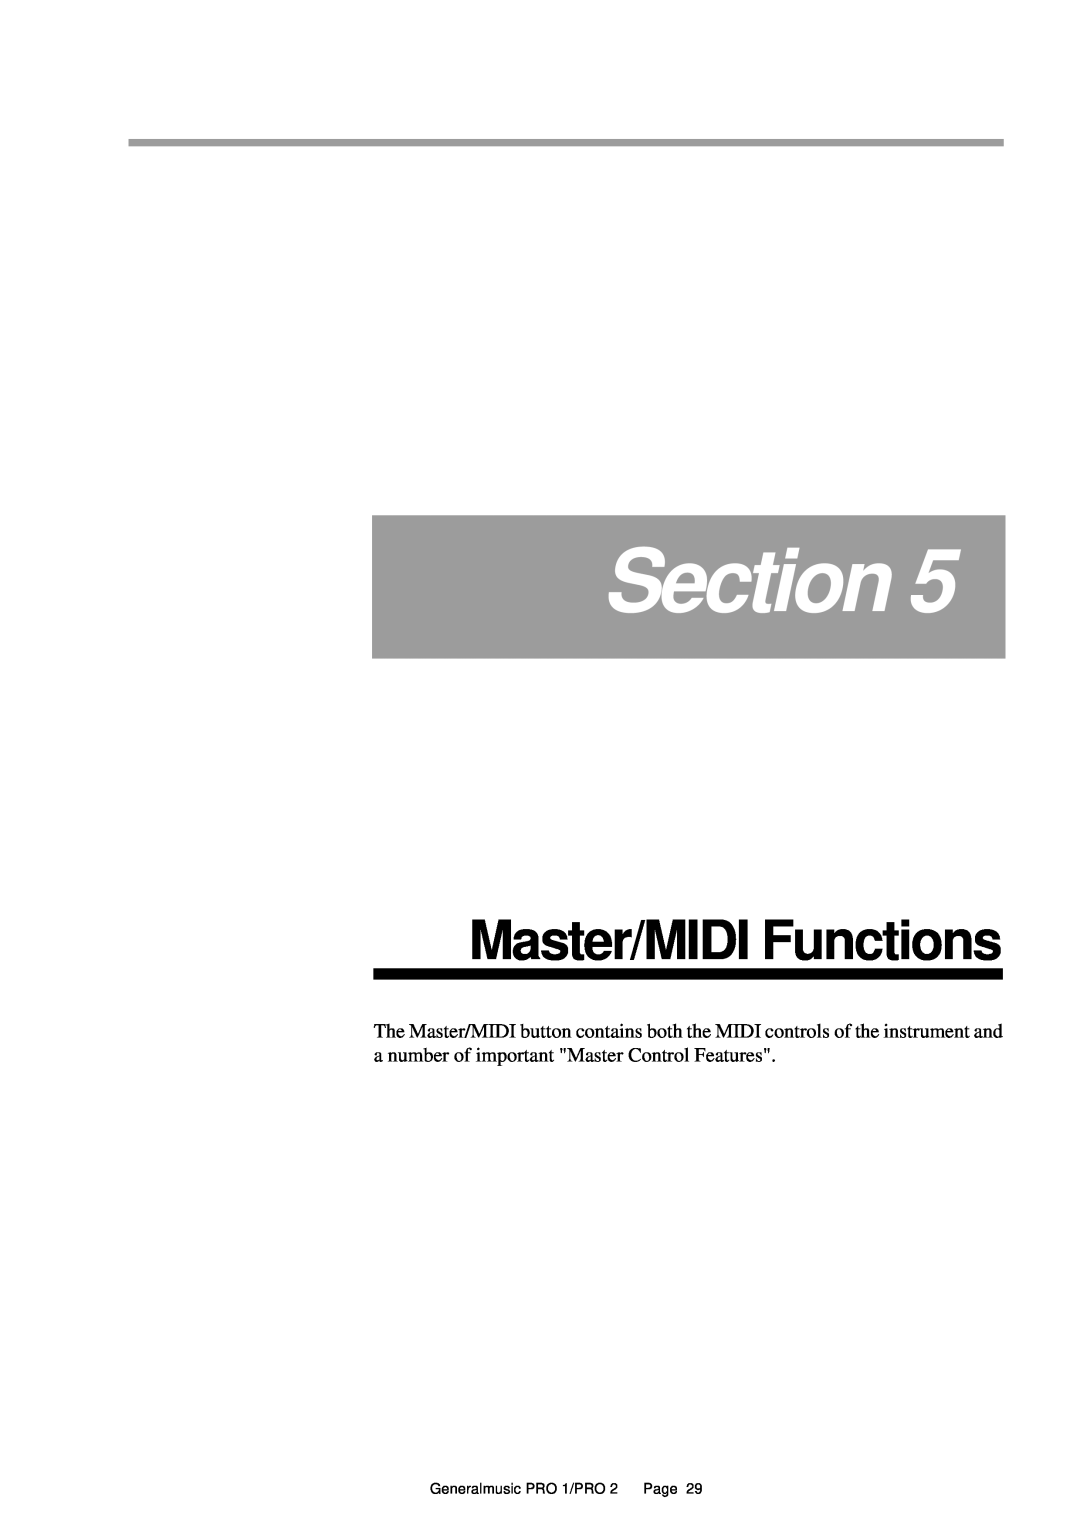 Peavey Pro 2, Pro 1 owner manual Master/MIDI Functions, Section, Generalmusic PRO 1/PRO 2 Page 